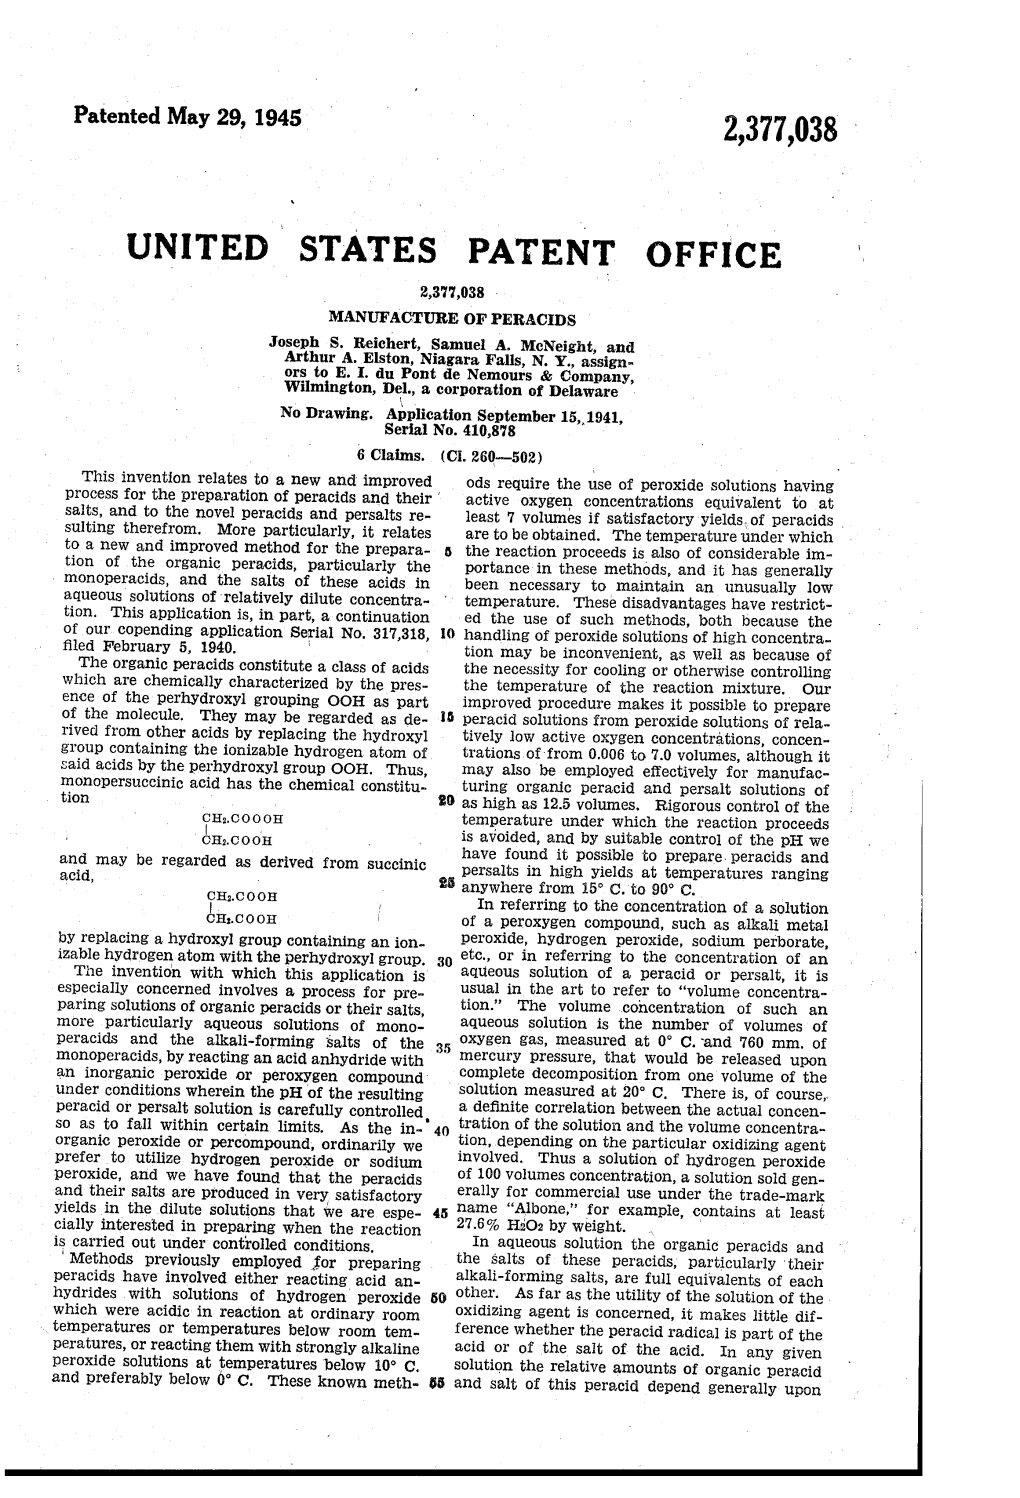 UNITED STATES PATENT OFFICE MANUFACTURE of PERACDS Joseph S